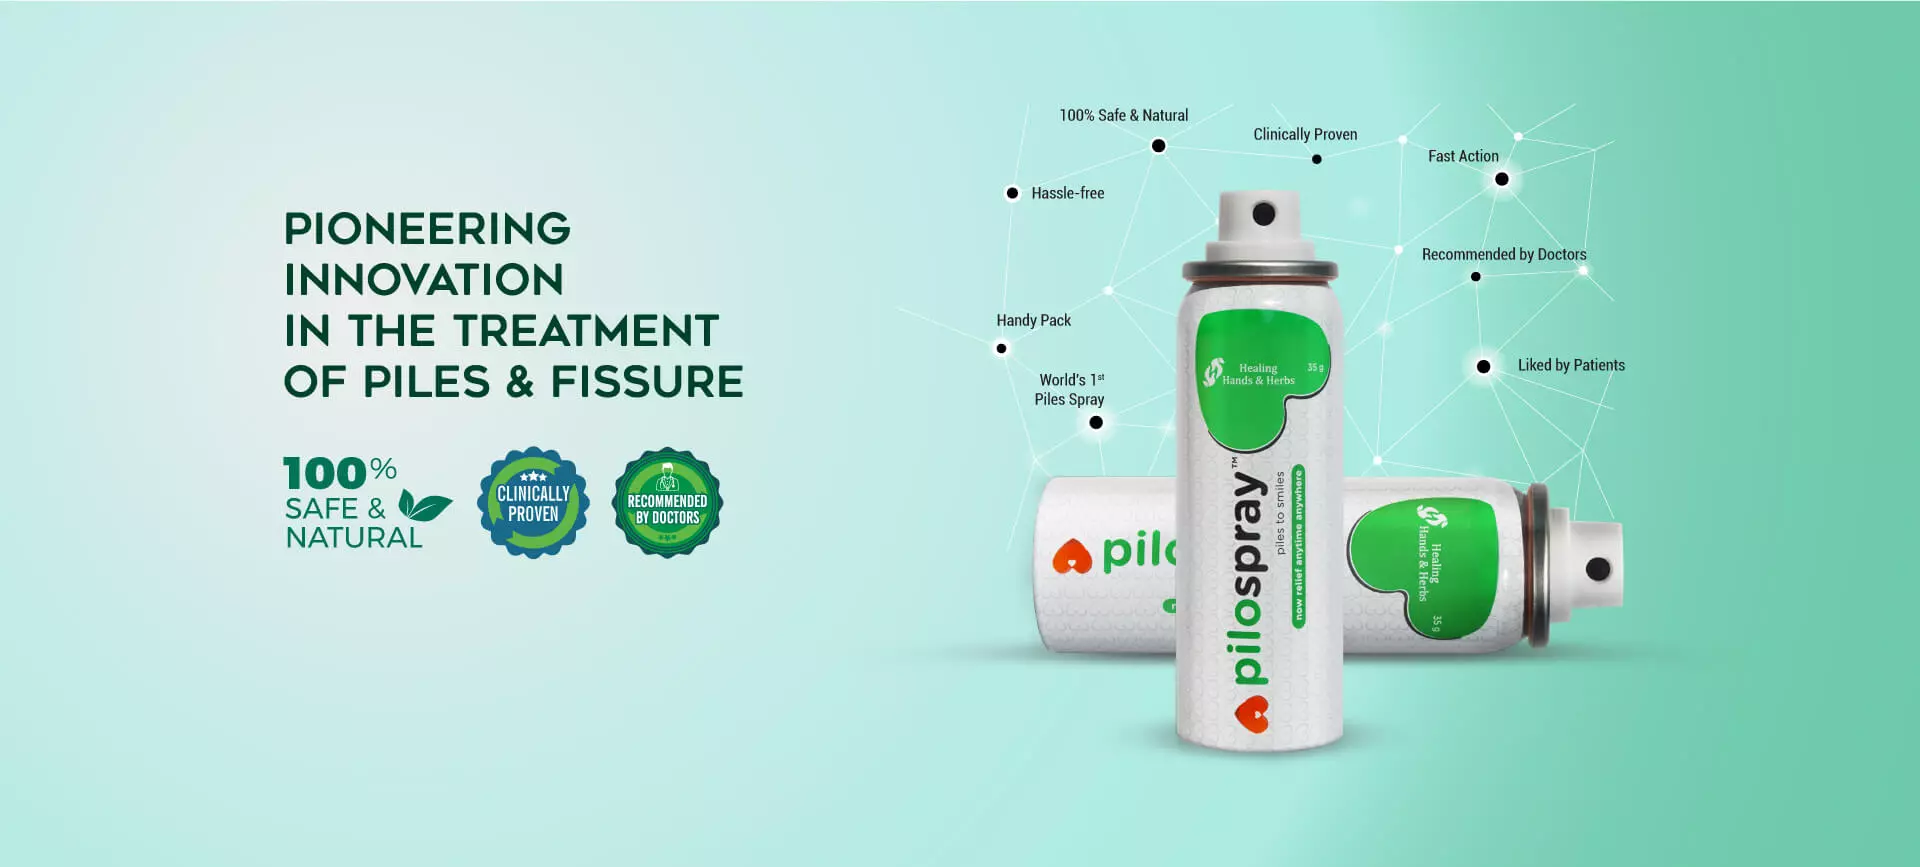 PiloSpray an Innovation in Piles and Fissure Treatment - 100% Safe Natural, Clinically Proven, Recommended by Doctors - Homepage Banner Desktop